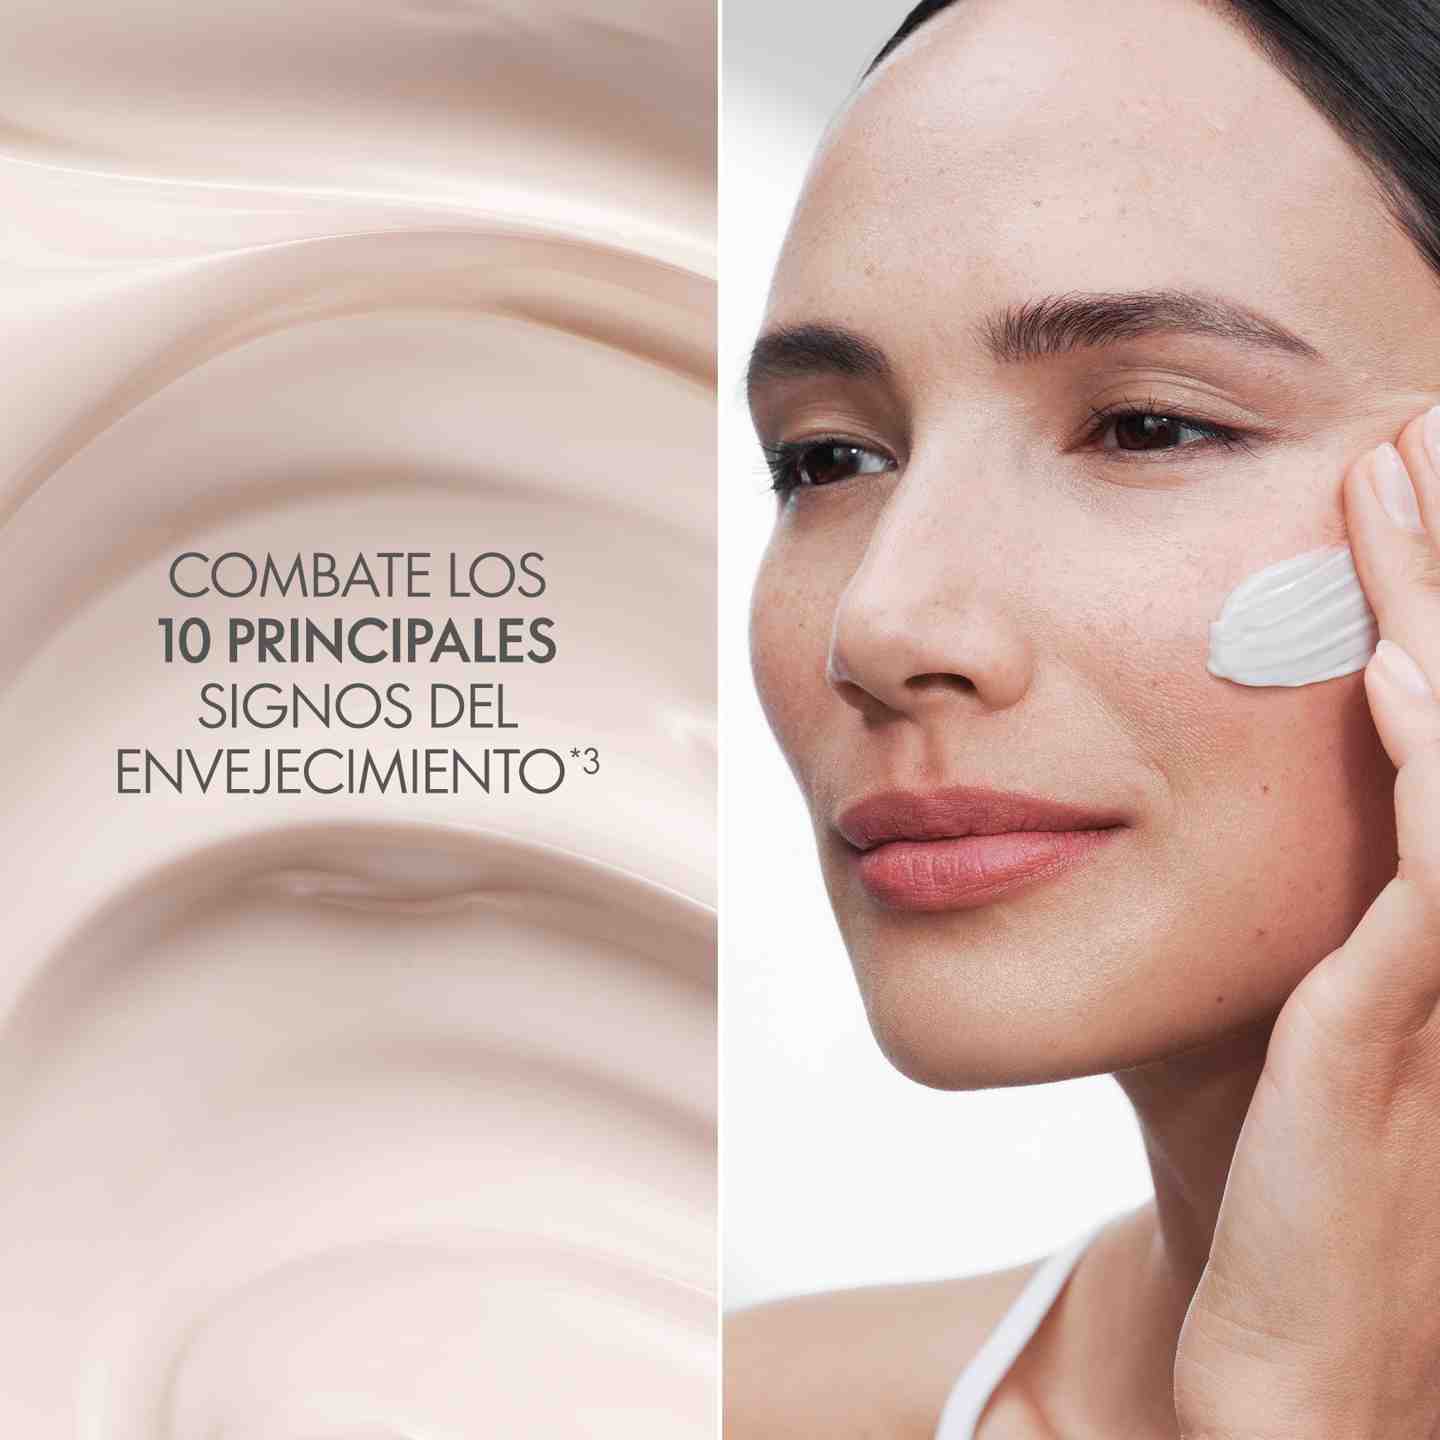 https://media-cdn.oriflame.com/productImage?externalMediaId=product-management-media%2fProducts%2f41057%2fMX%2f41057_2.png&id=18234951&version=1